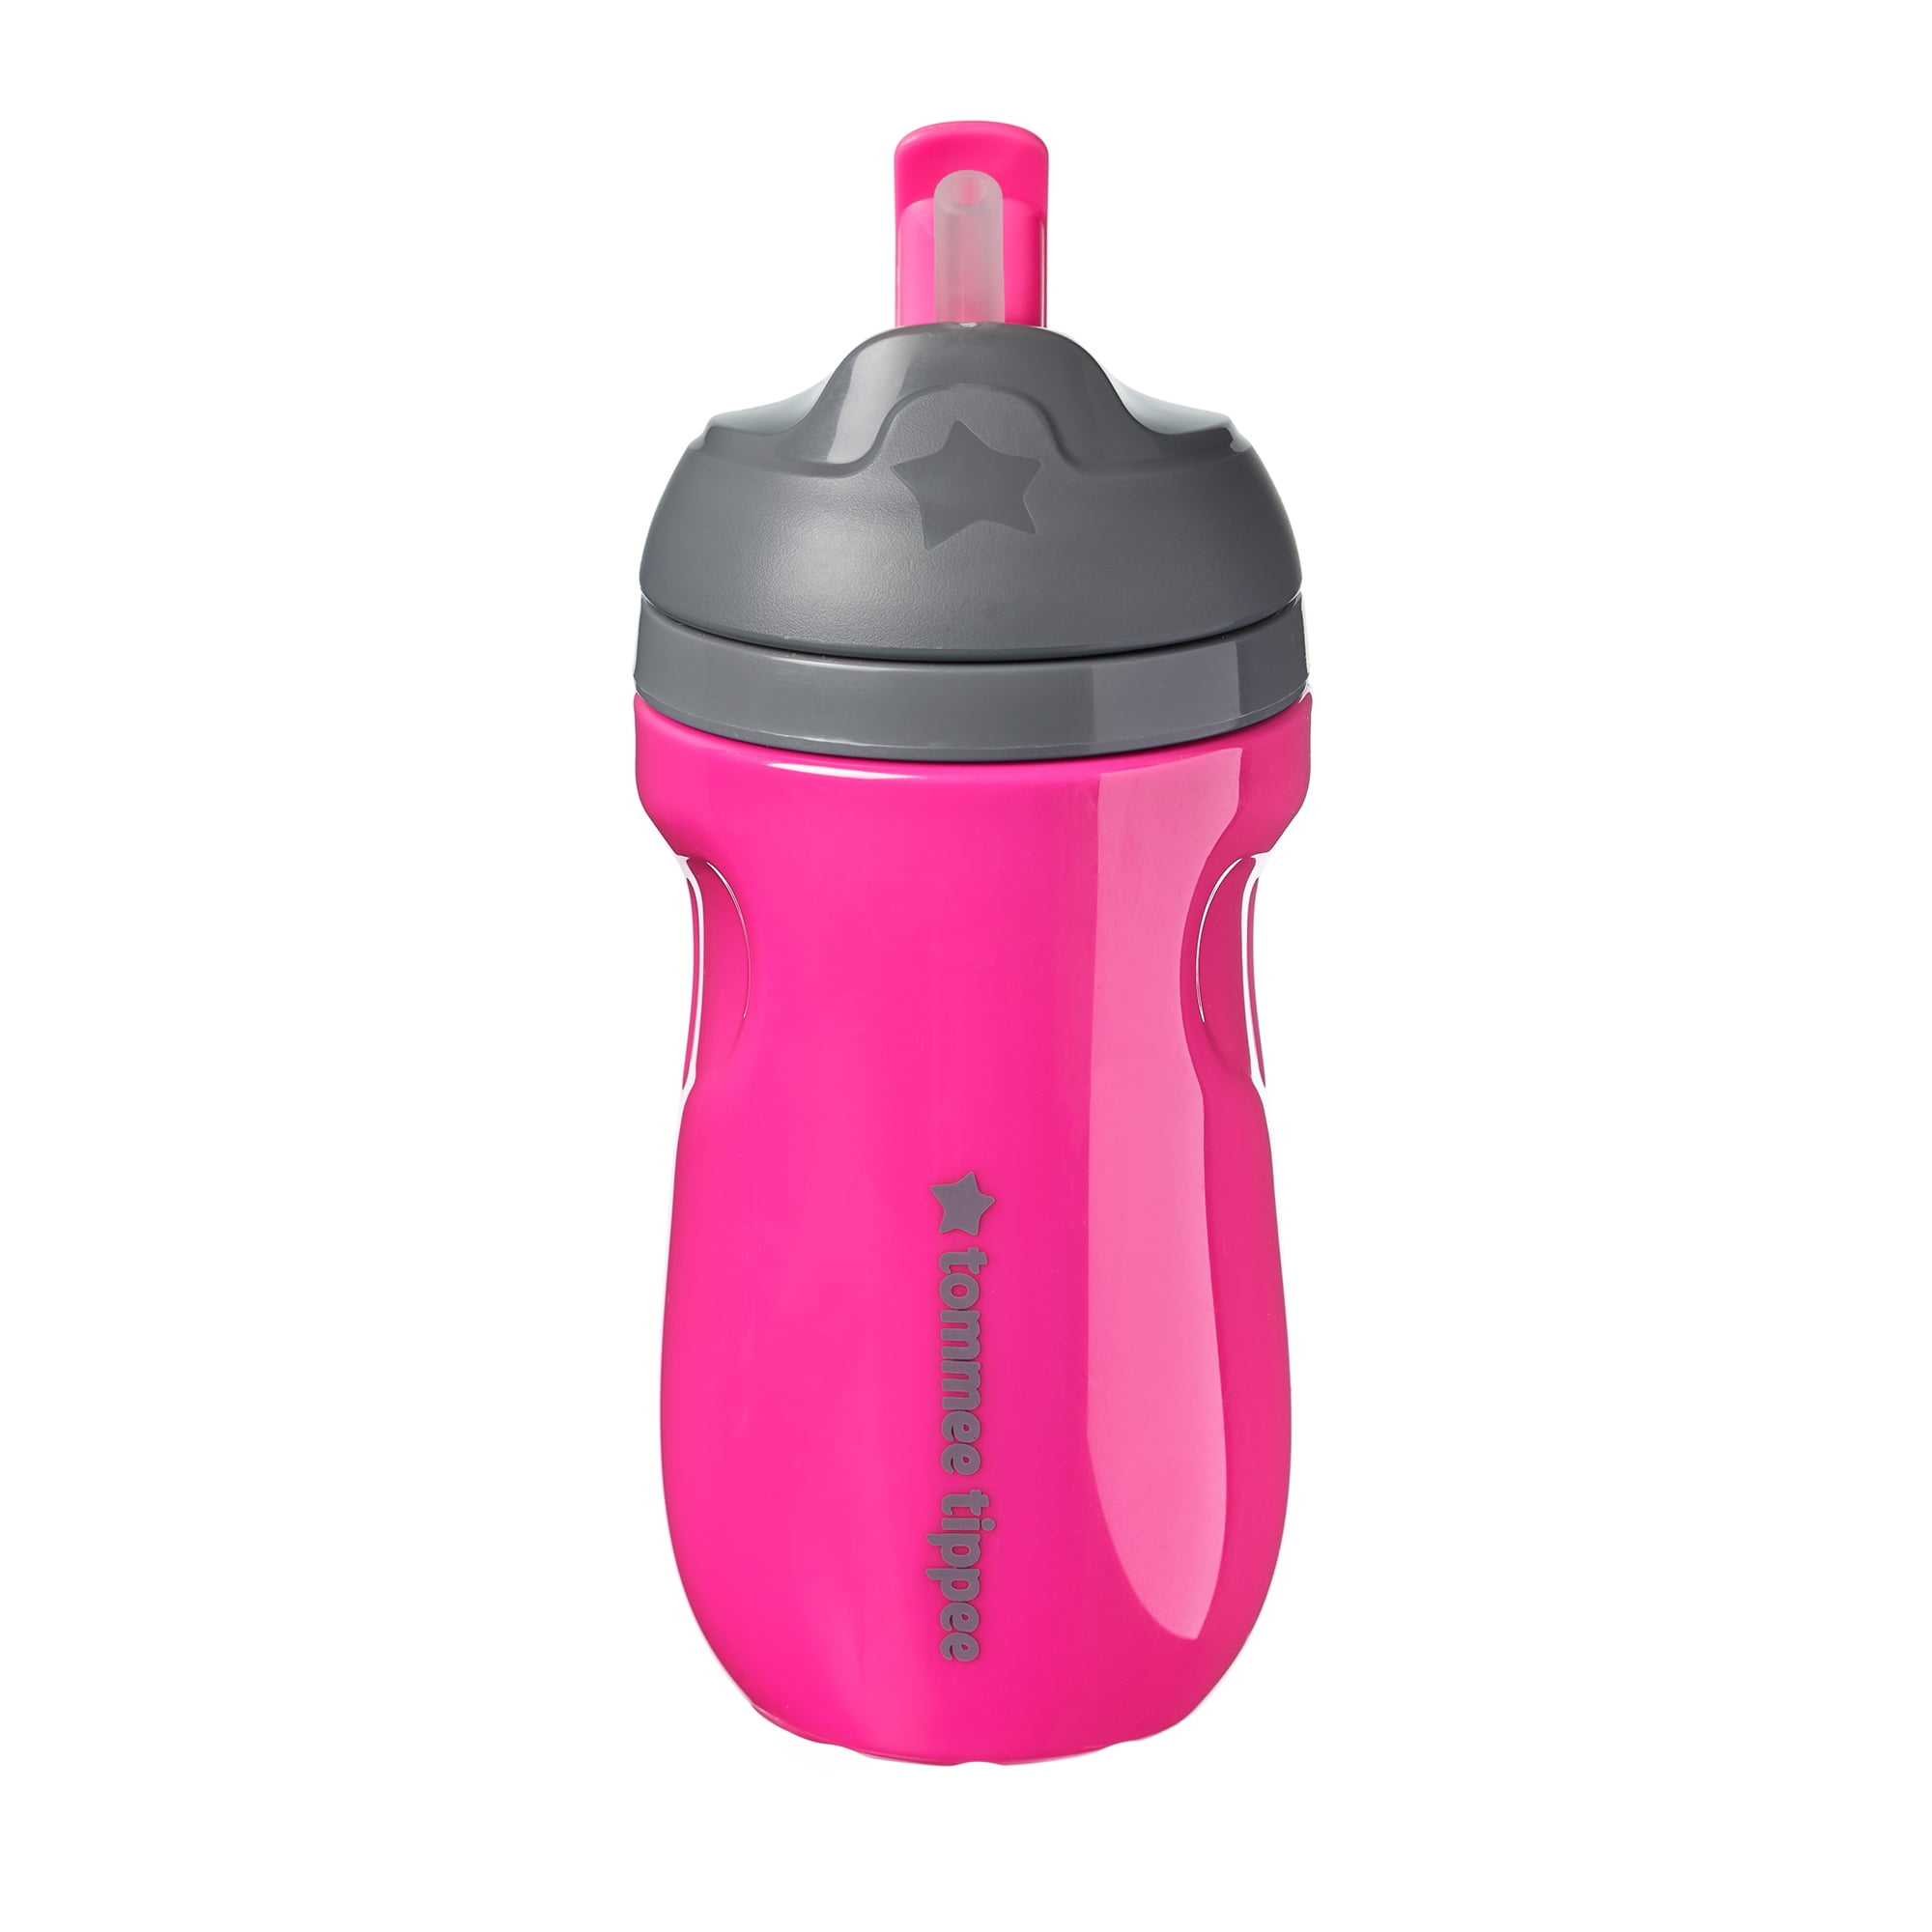 Baby Boom - Tommee Tippee Explora Active Straw Cups